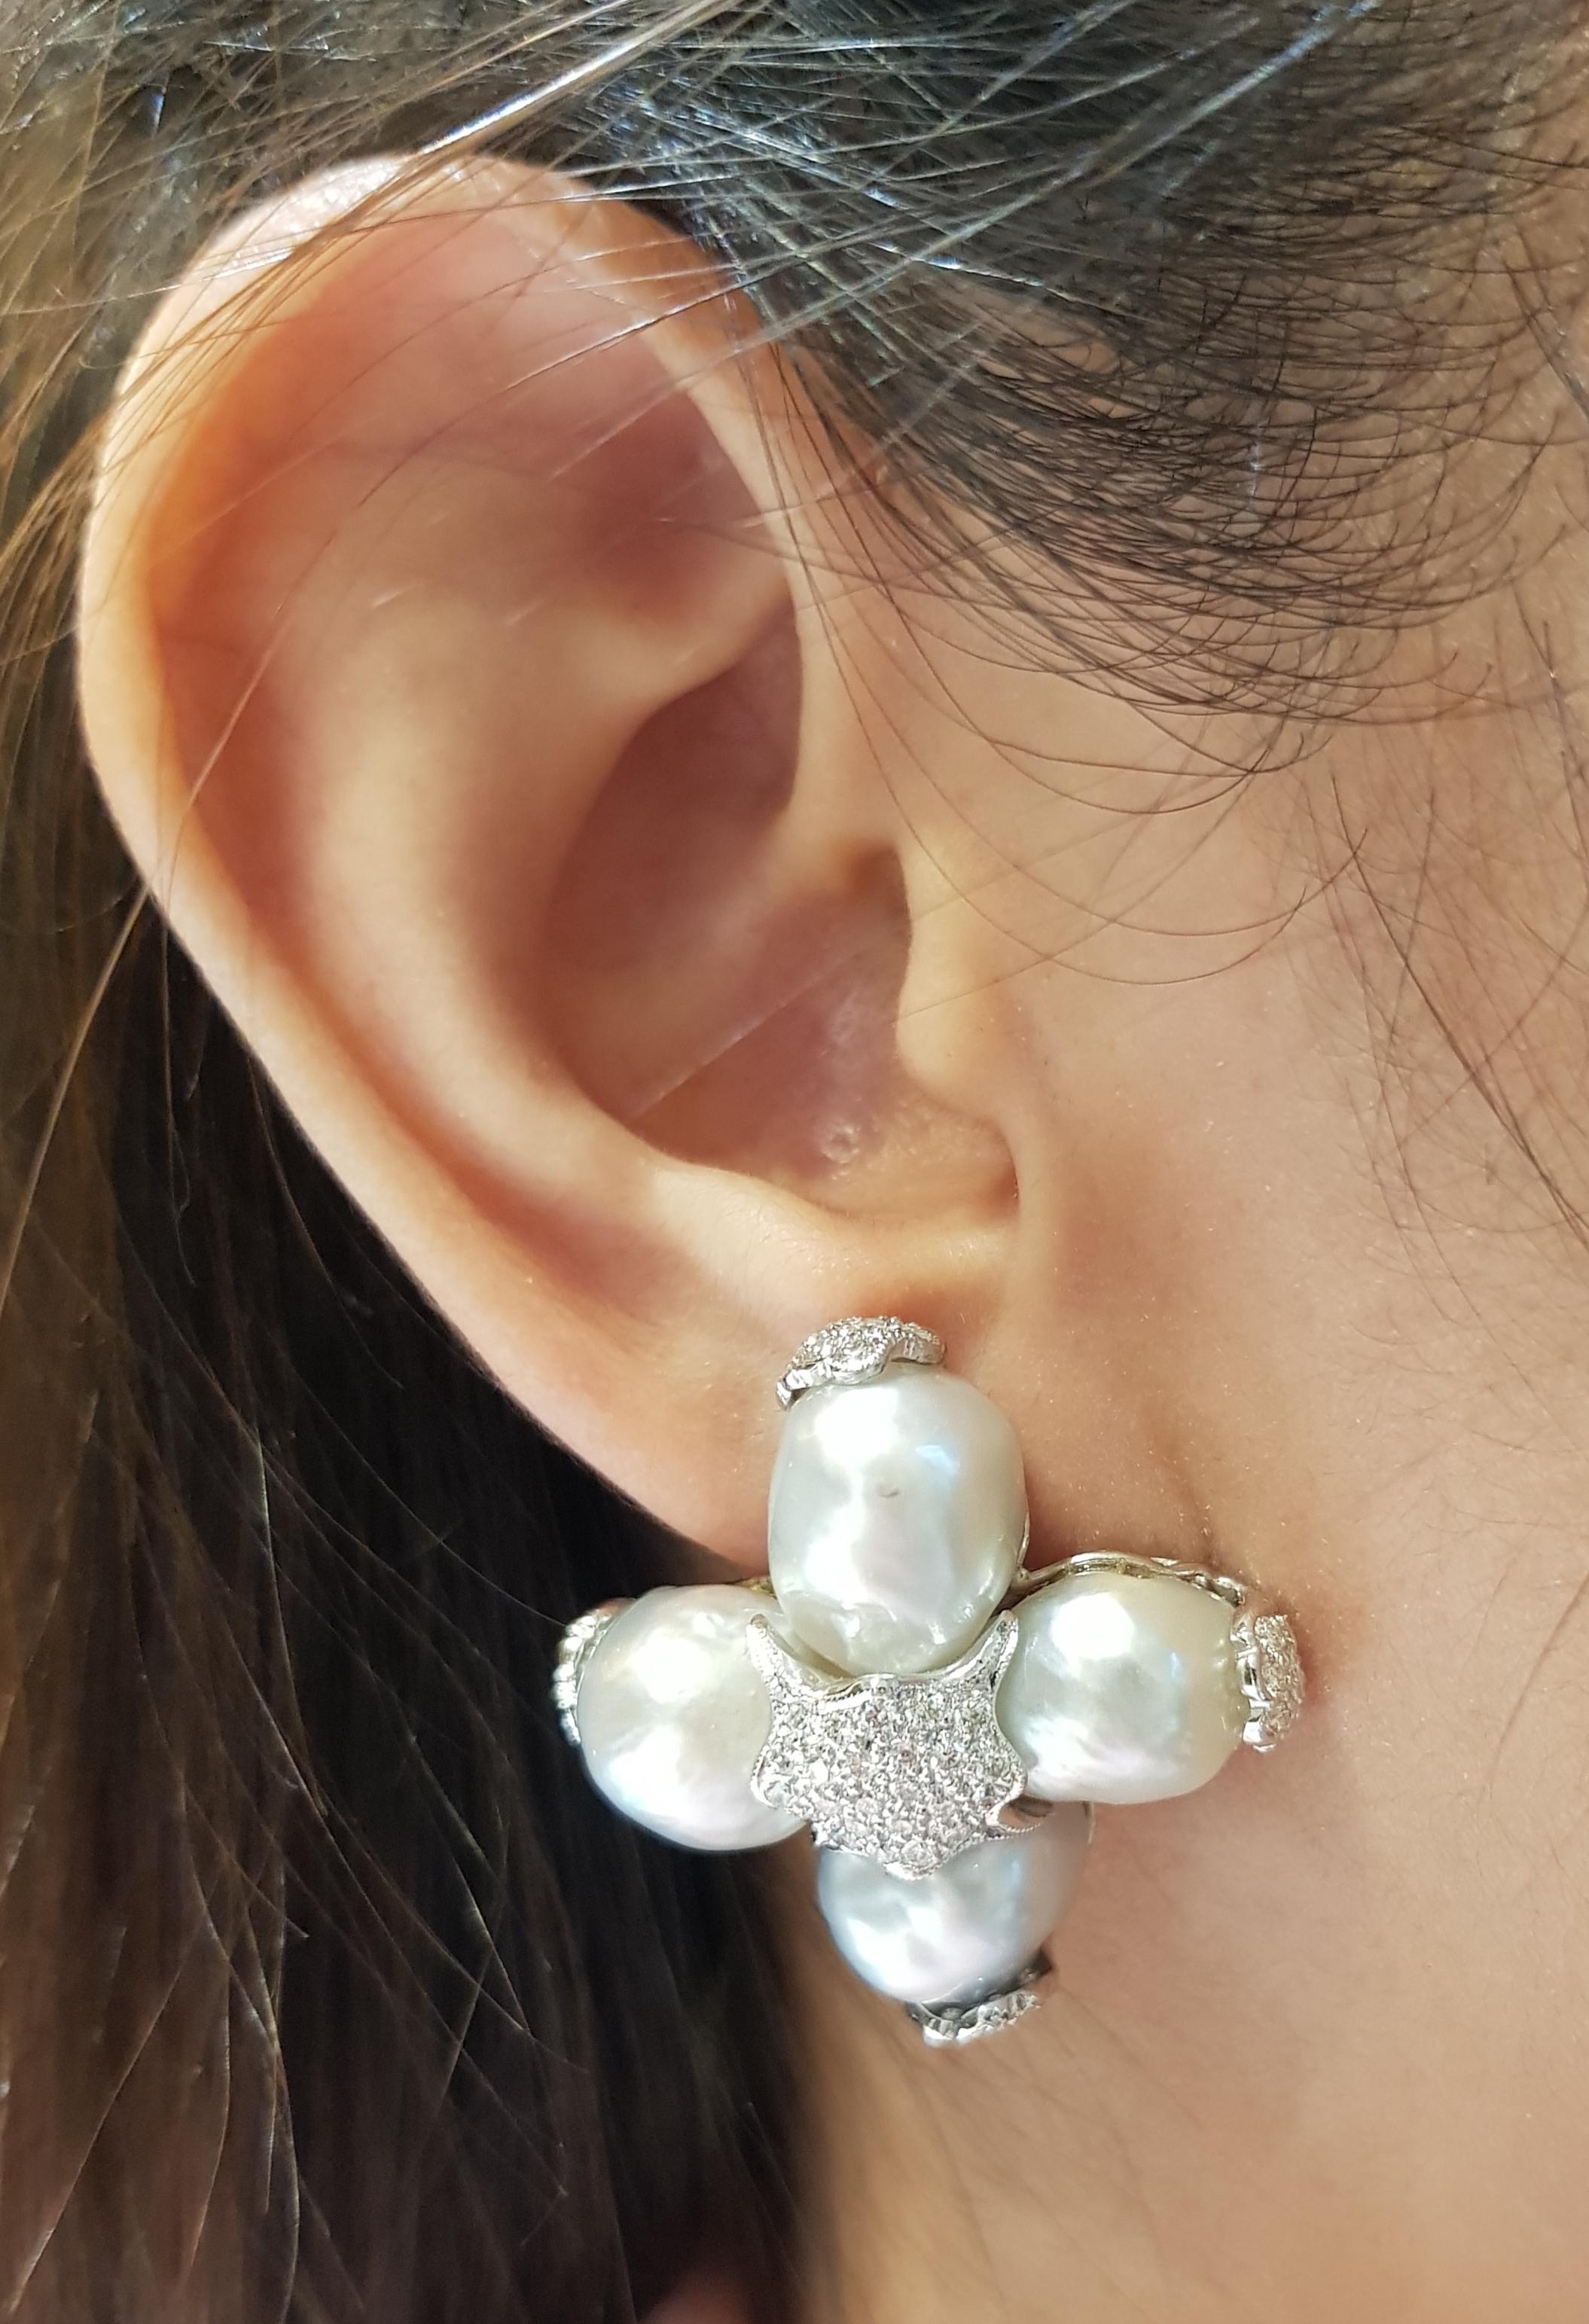 South Sea Pearl with Diamond 1.98 carats Earrings set in 18 Karat White Gold Settings

Width:  3.0 cm 
Length:  3.0 cm
Total Weight: 30.2 grams

